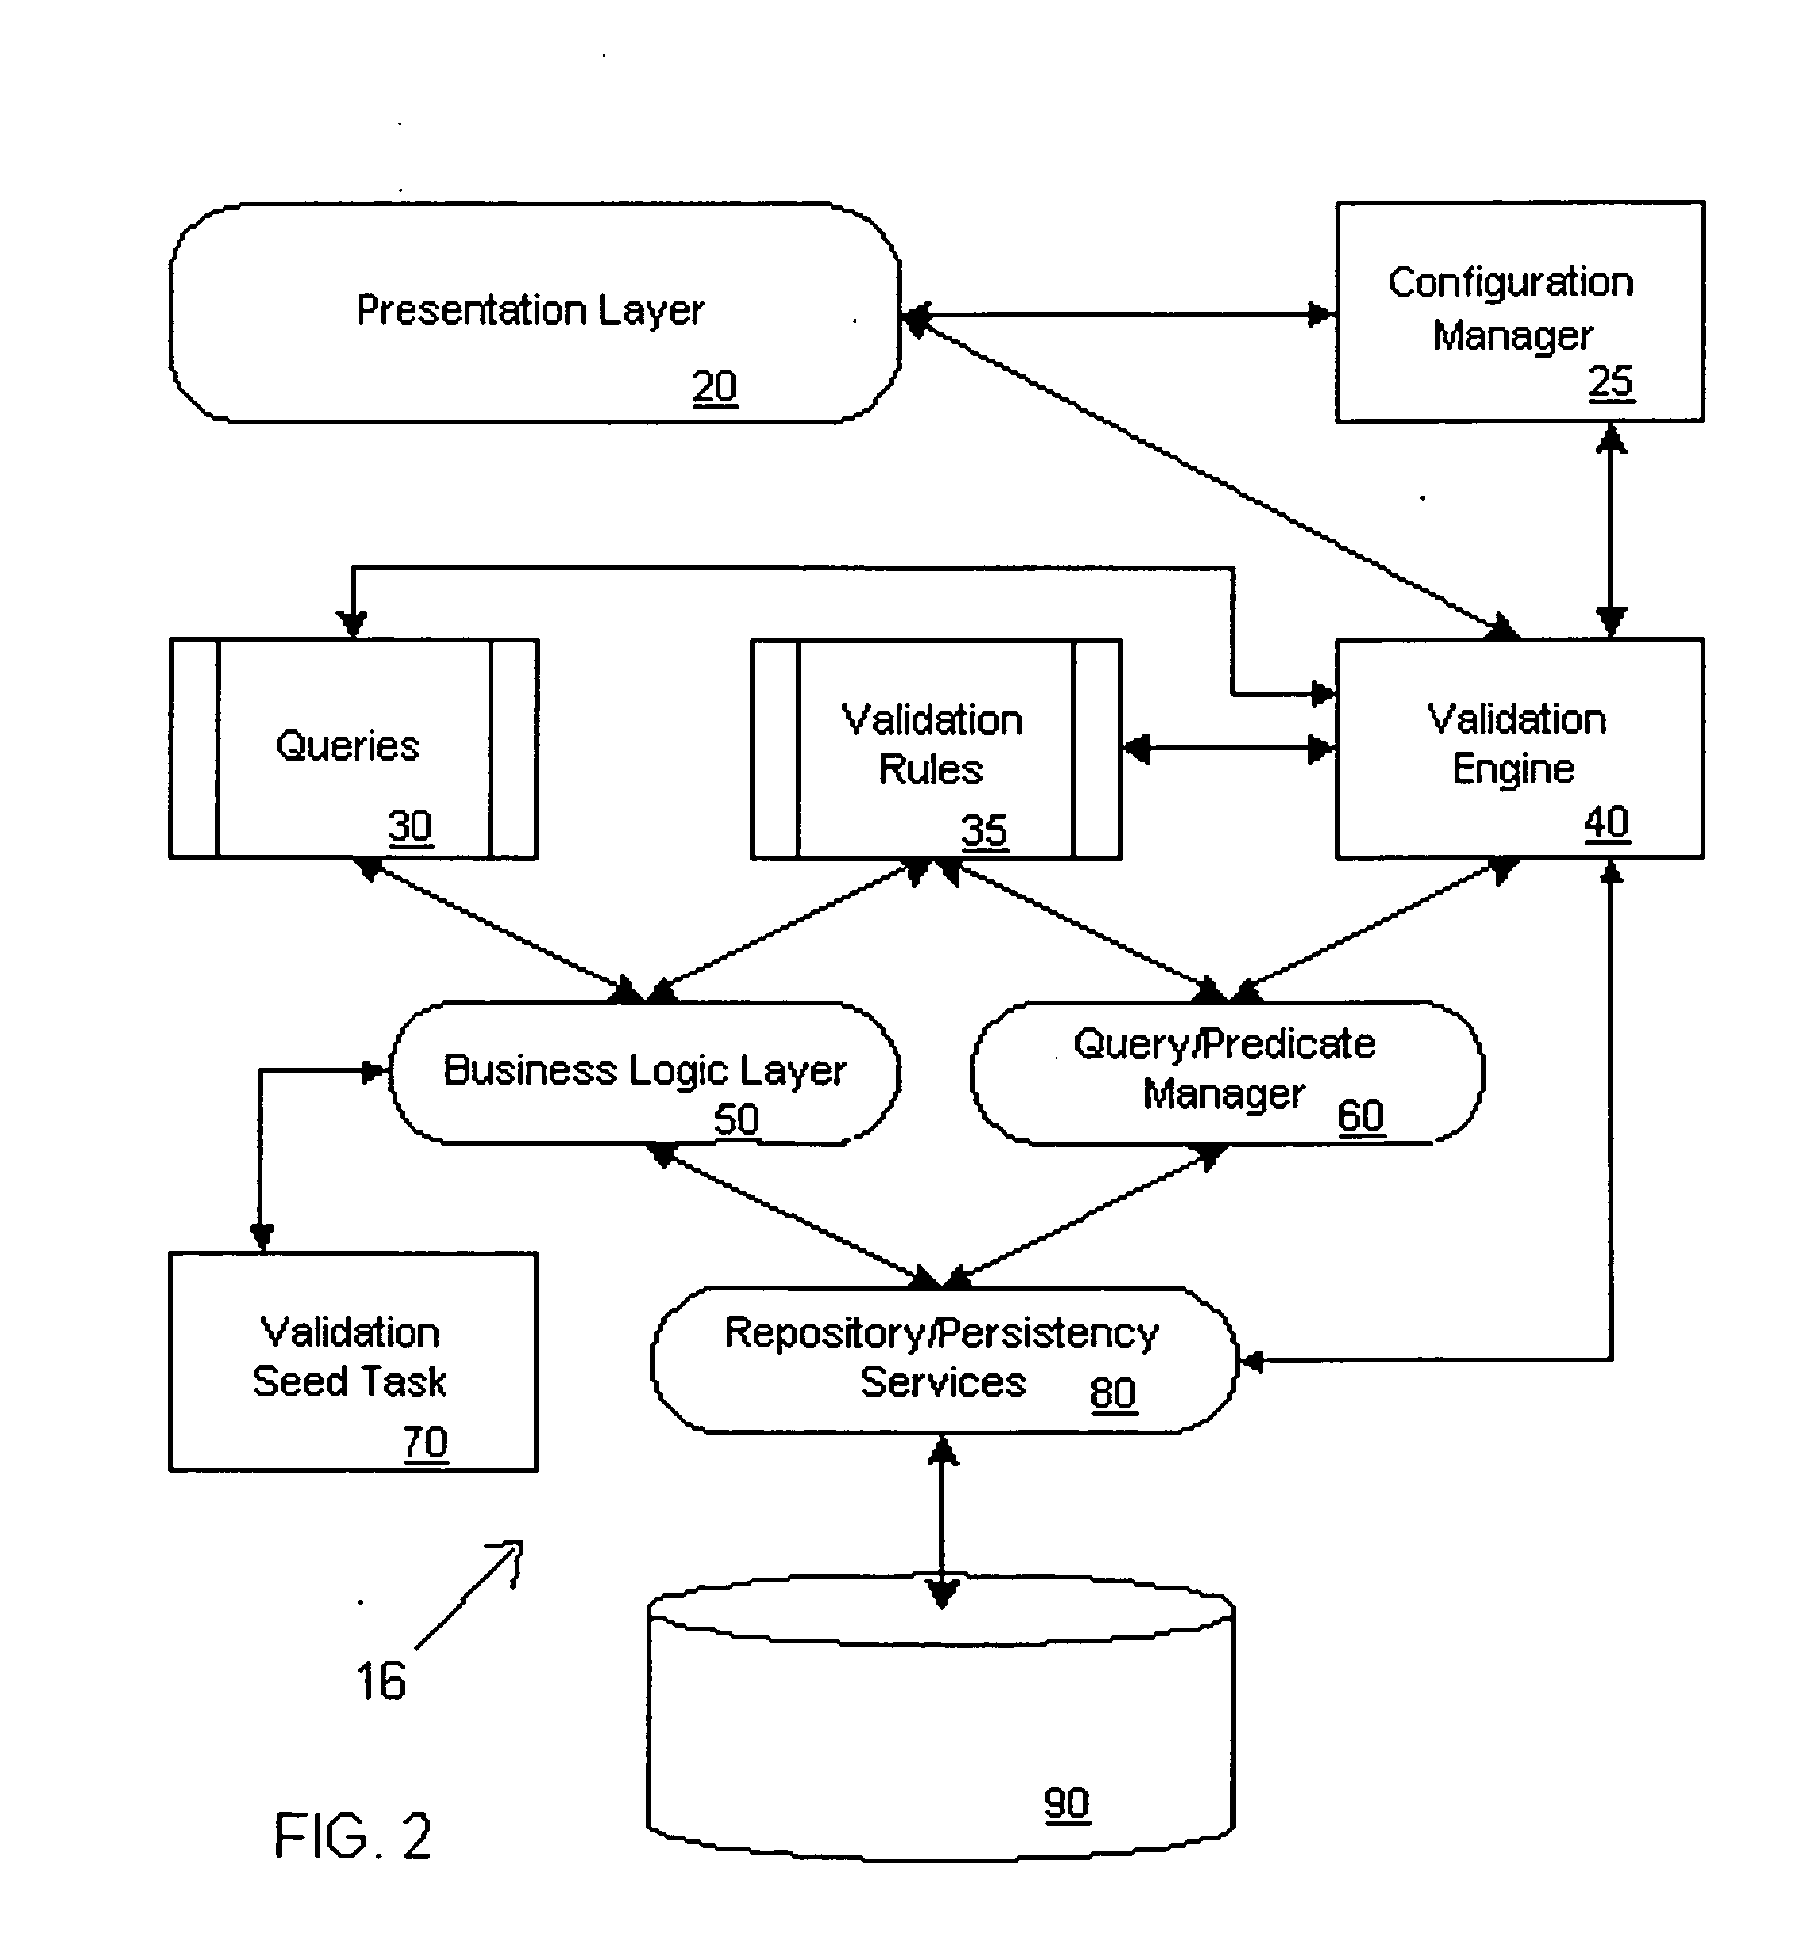 Systems and methods for validating design meta-data